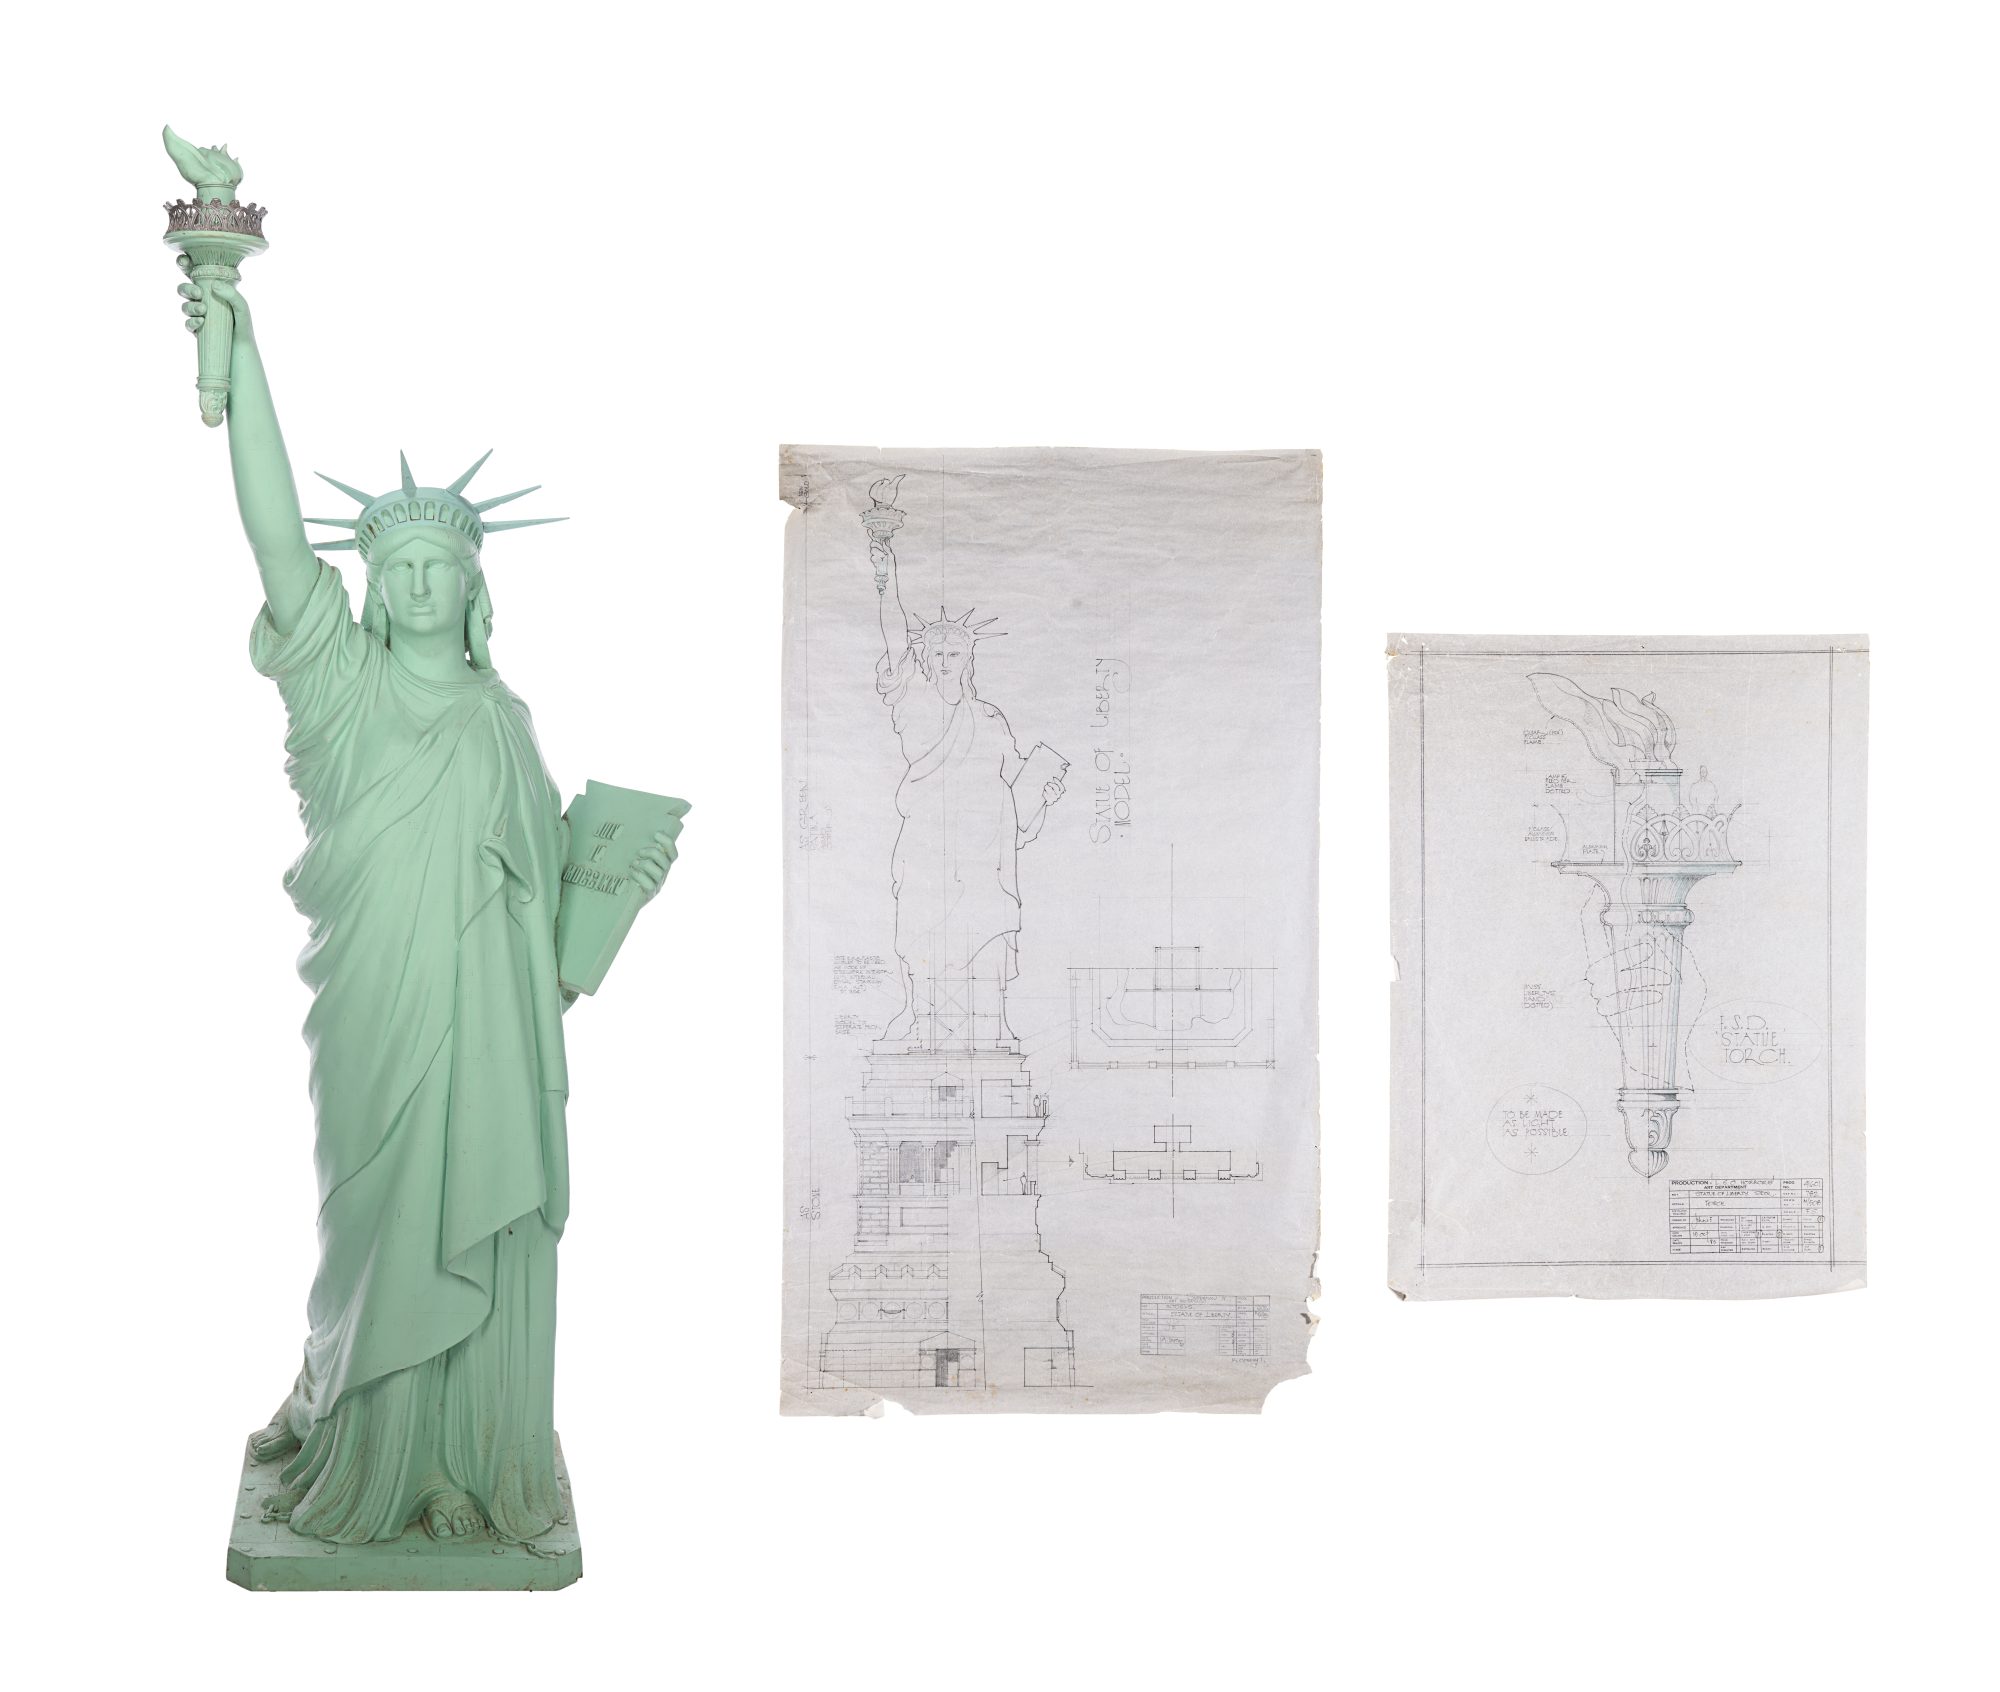 149743_Model Miniature Statue of Liberty and Pair of Hand_1